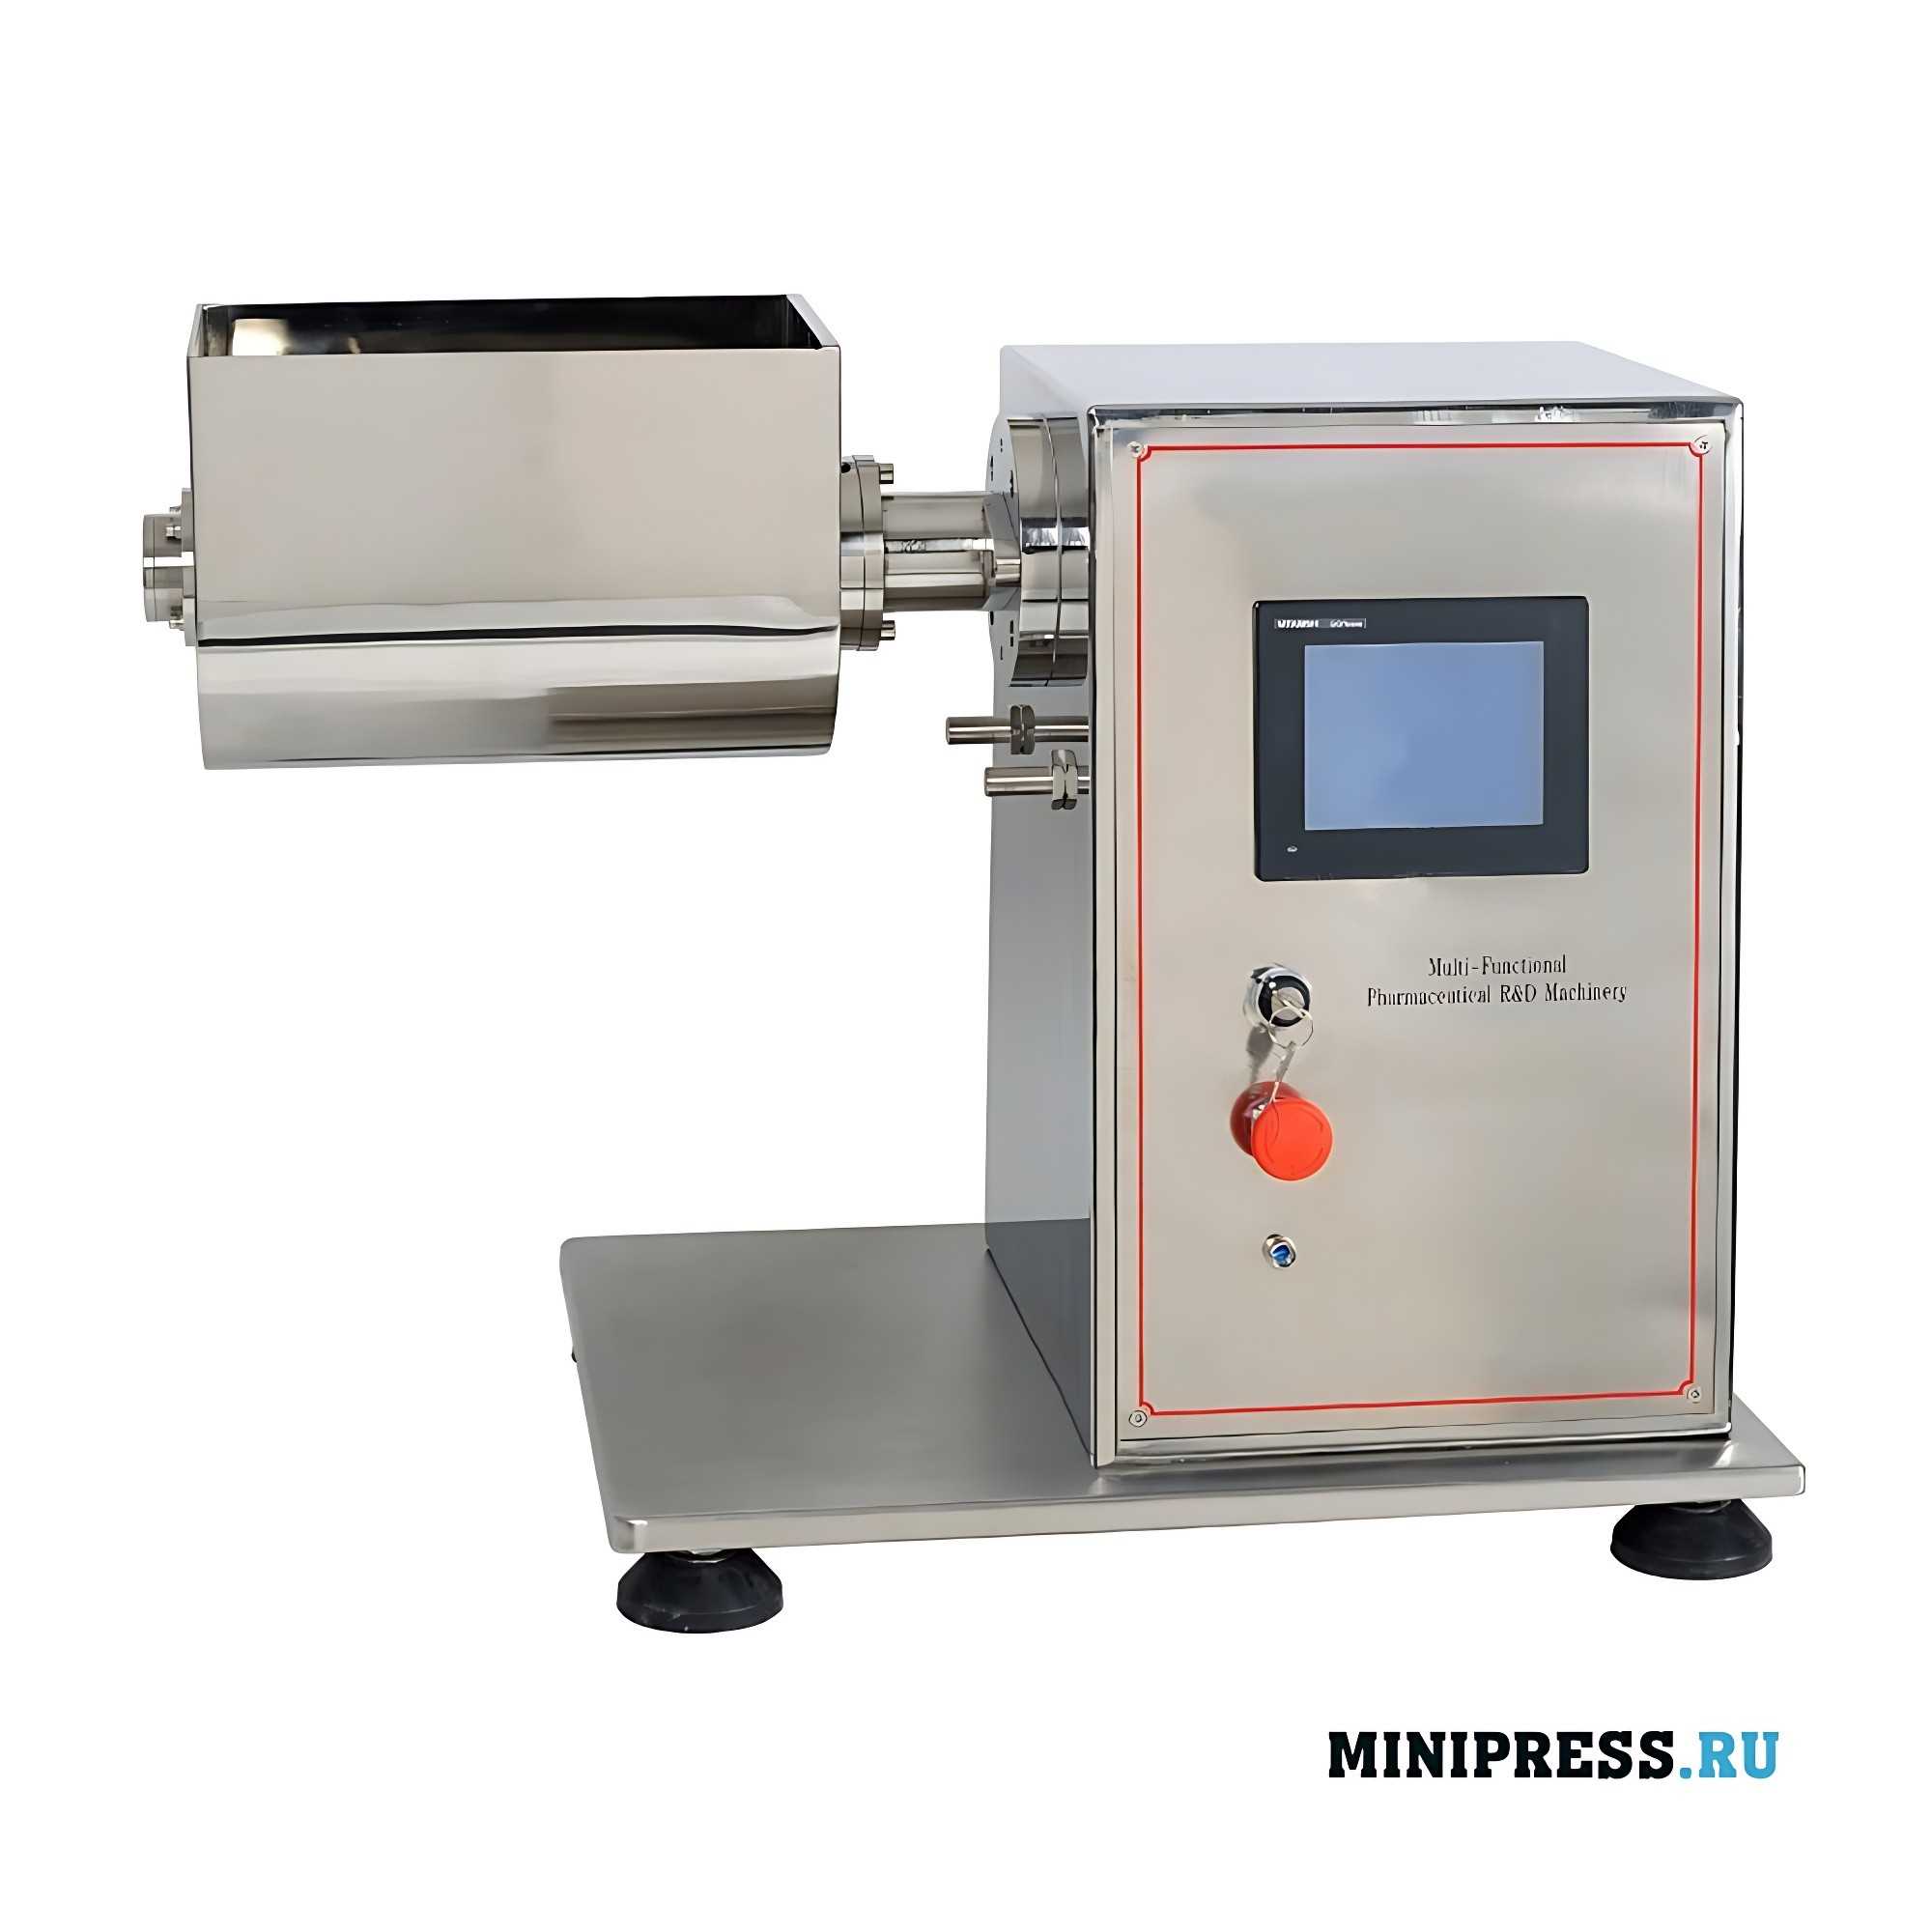 Multifunctional experimental pharmaceutical Equipment and Grooved Mixer UNIV 2